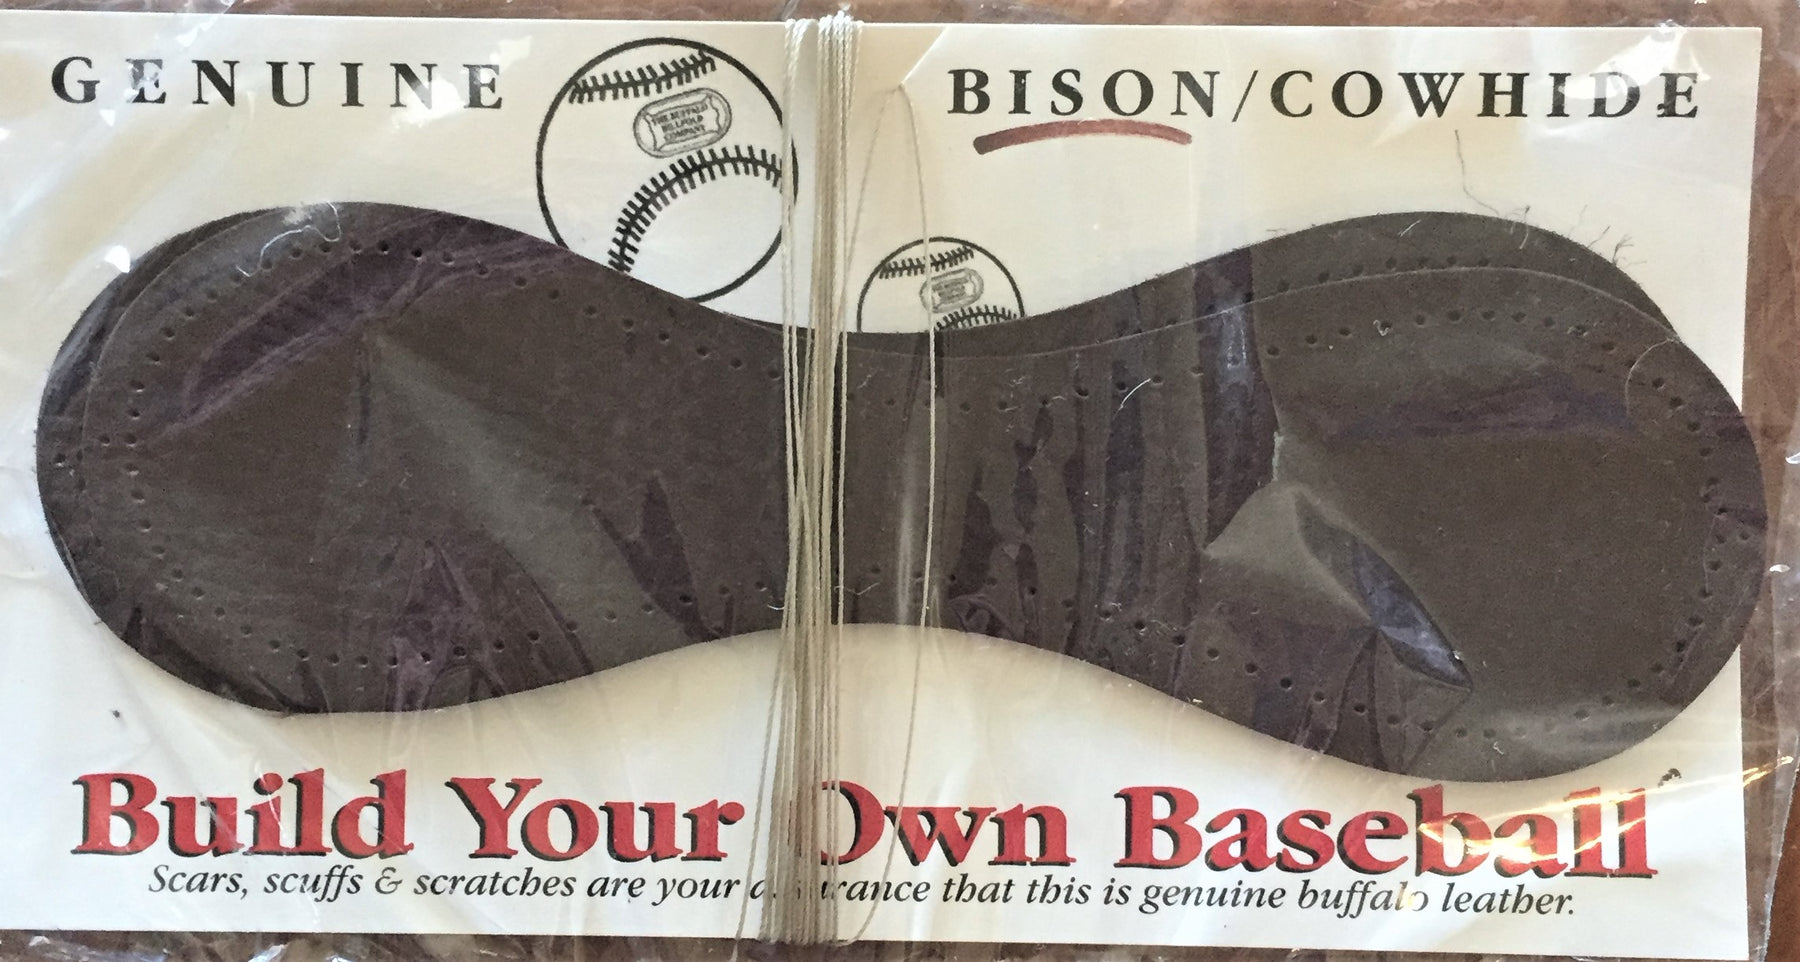 A possible pastime - build your own bison leather baseball